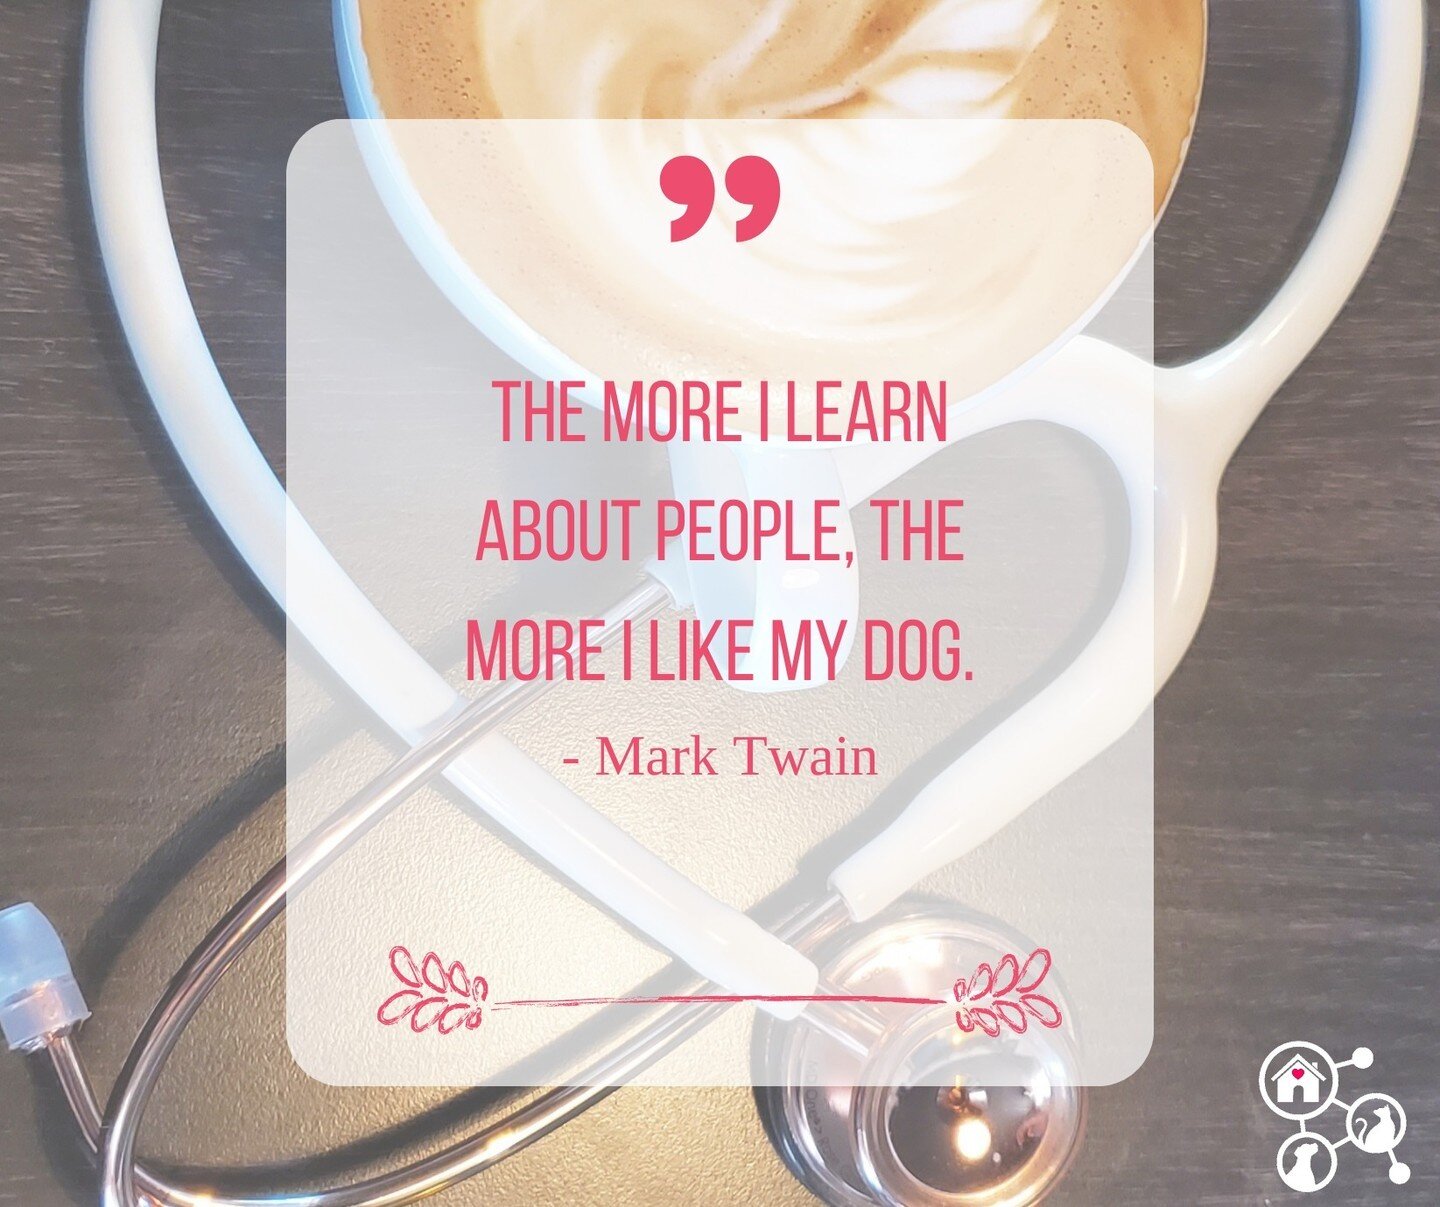 Ever feel like the more you learn about people, the more you appreciate your dog's company? 🤔🐾 Mark Twain got it right: 'The more I learn about people, the more I like my dog.' Share a moment when your dog's simplicity outshone the complexities of 